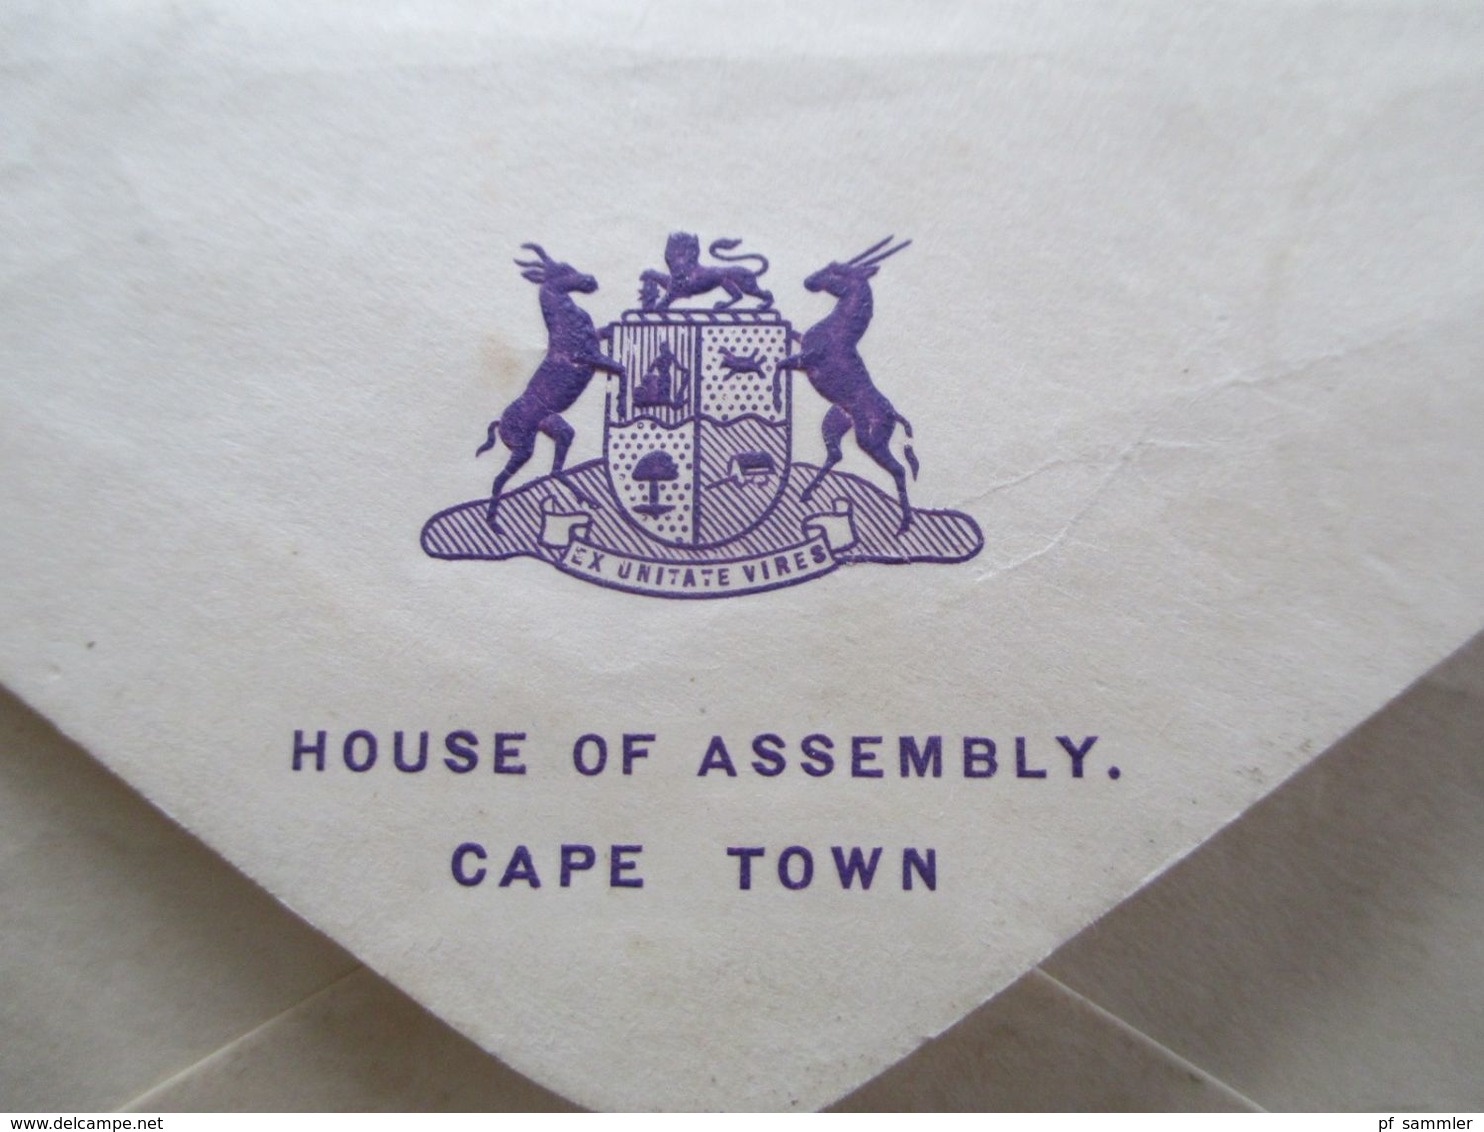 Südafrika 1947 Beleg Mit Wappen House Of Assembly Cape Town 3 Paare South Africa / Suid Africa Stempel Parliament - Covers & Documents